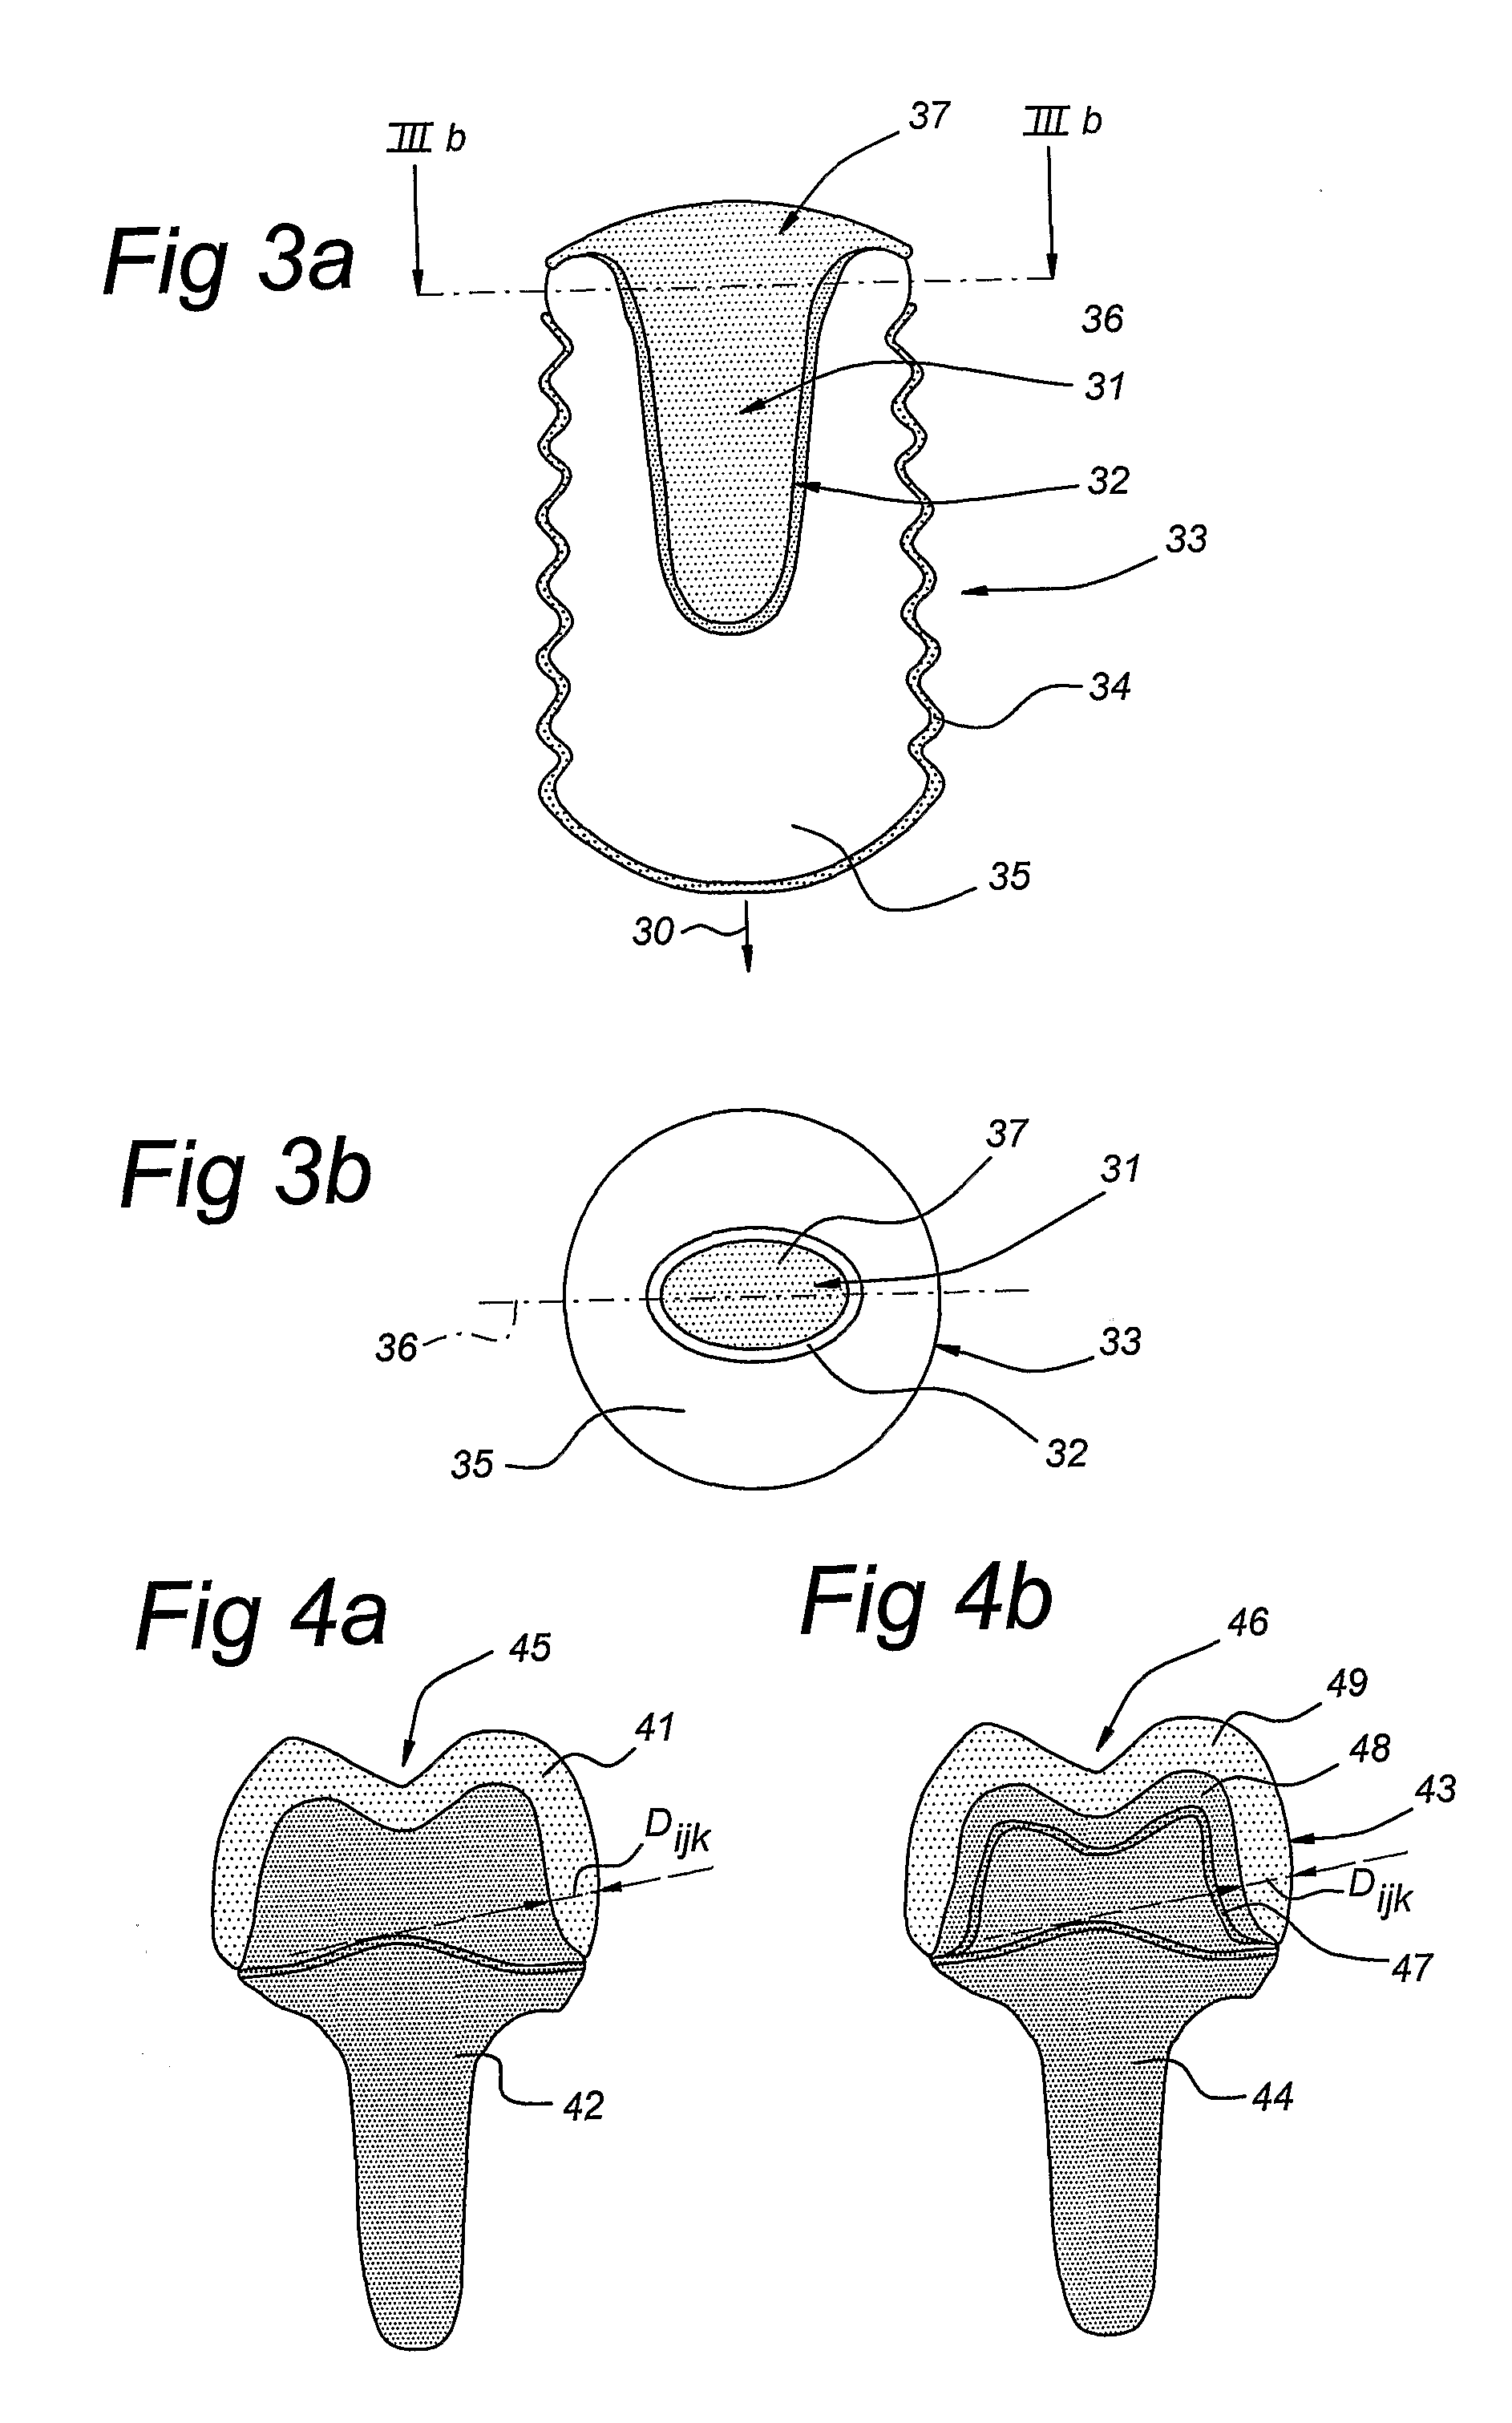 Method of Manufacturing and Installing a Ceramic Dental Implant with an Aesthetic Implant Abutment